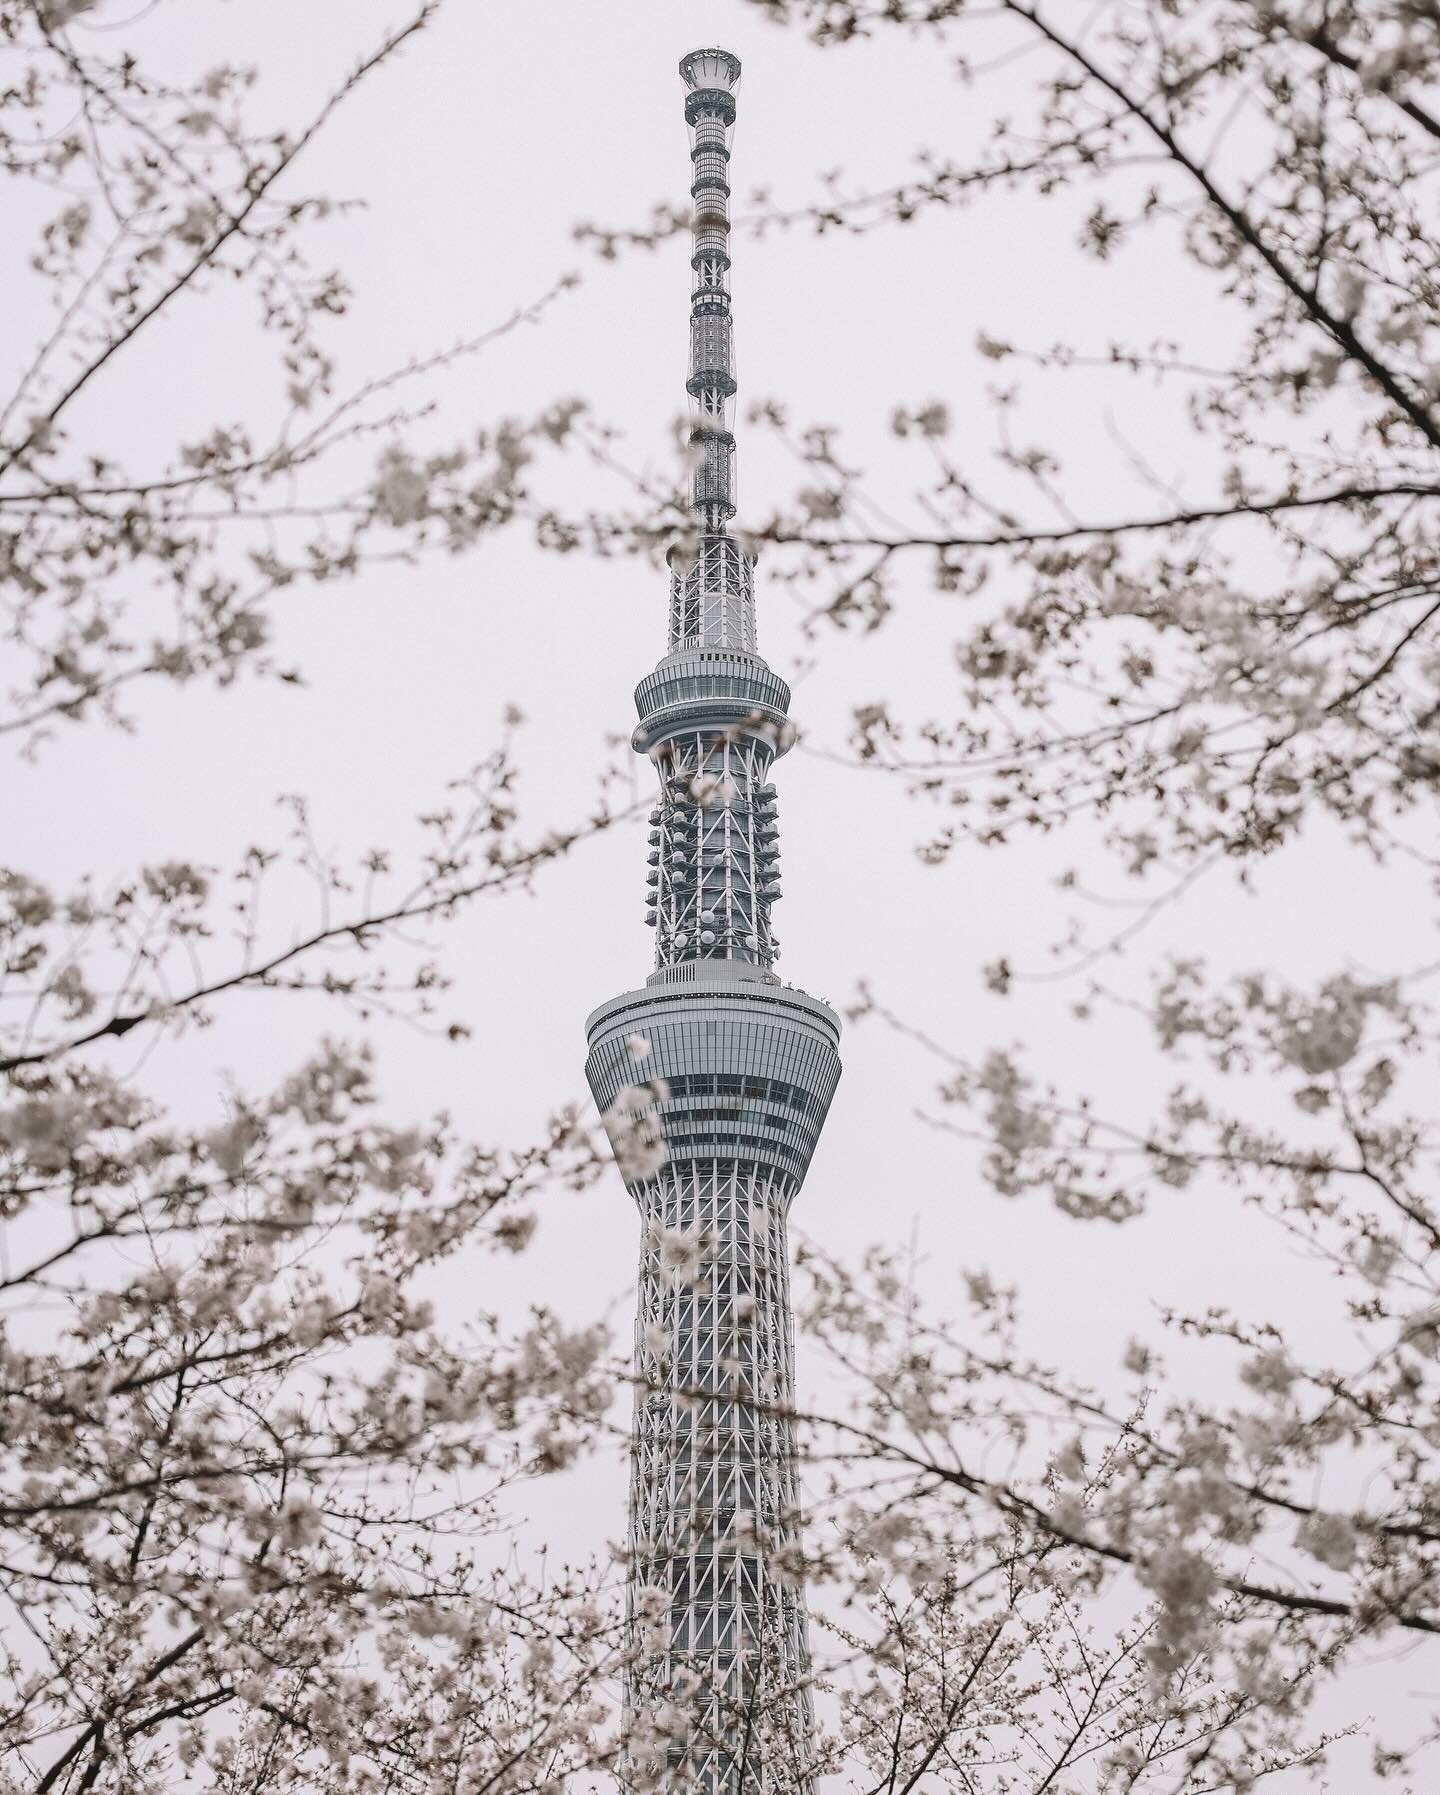 There are two iconic towers in Tokyo: Tokyo SkyTree (first photo) and the Tokyo Tower (second photo) 🗼

Thought it&rsquo;d be cool to capture them both with the cherry blossoms 🌸 

Which one is your favourite?

#tokyoskytree #tokyotower #tokyocherr